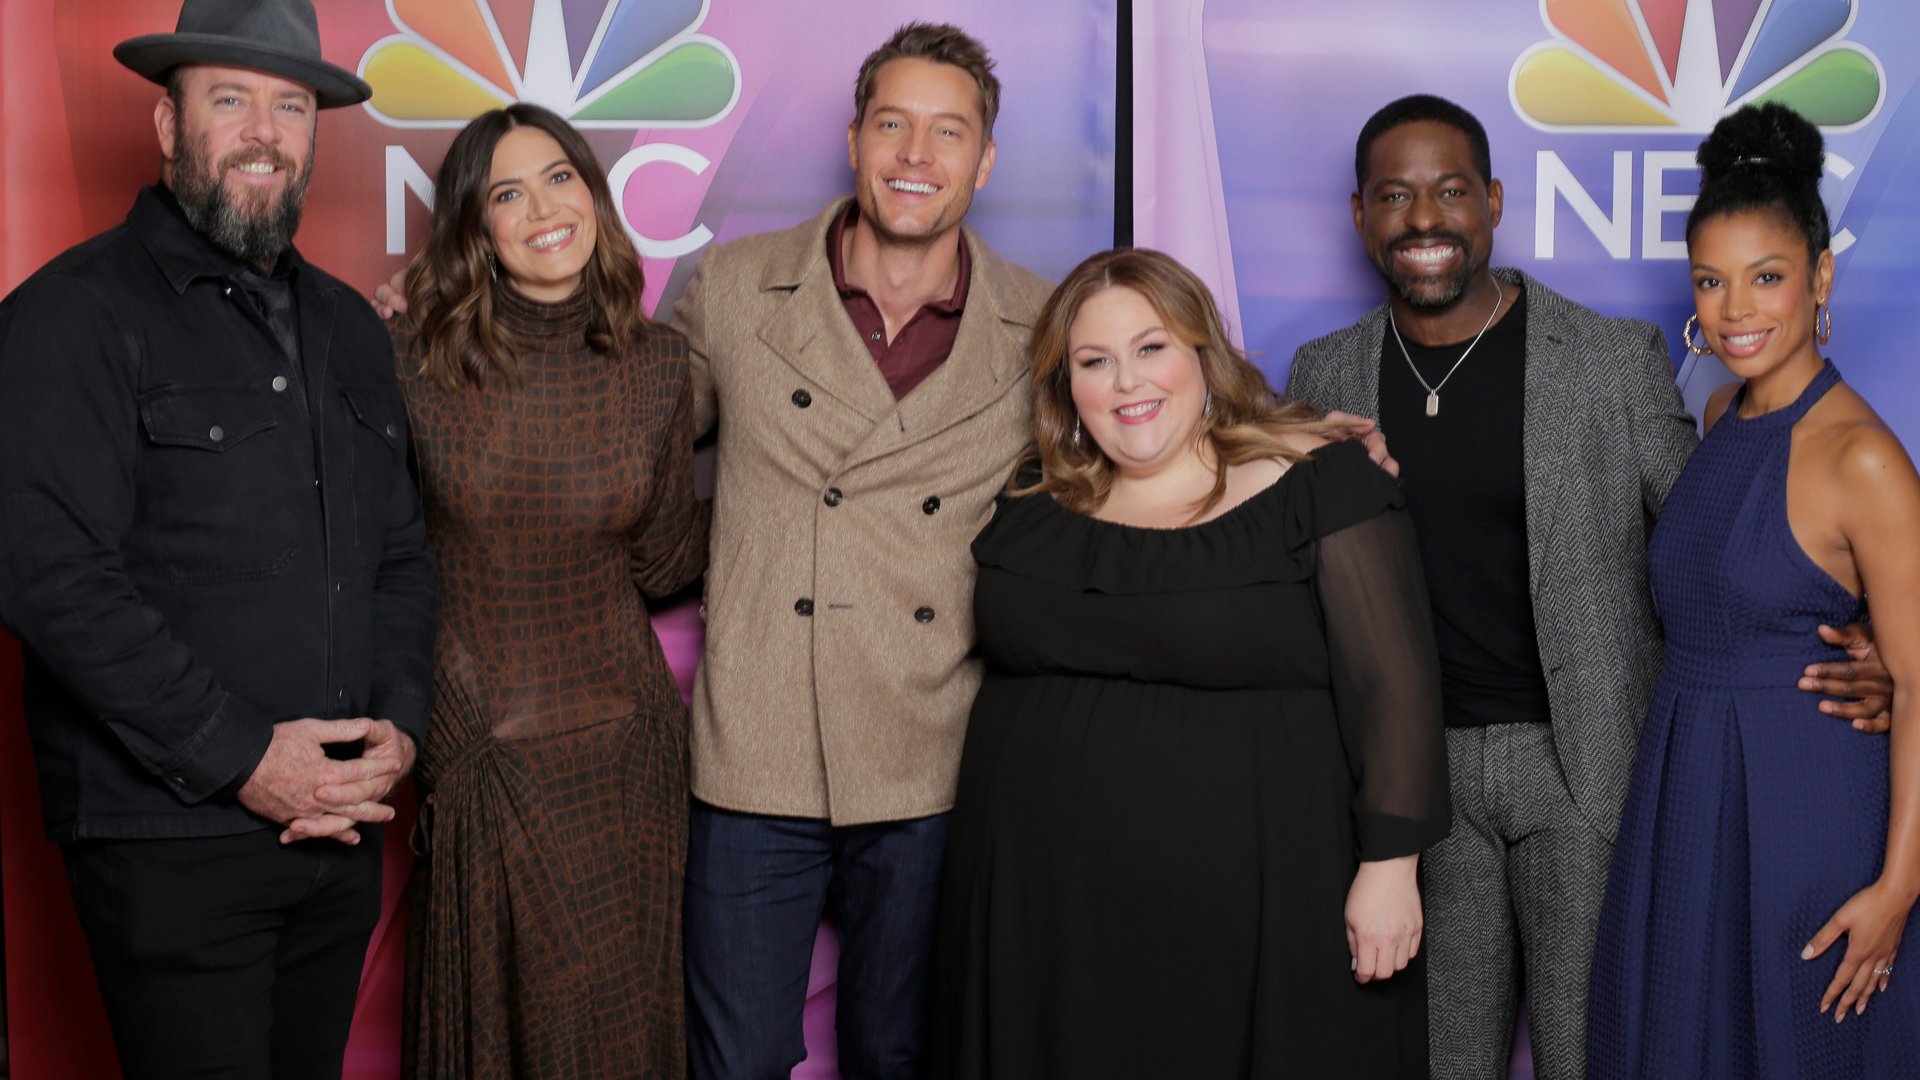 ‘This Is Us’ cast members Chris Sullivan, Mandy Moore, Justin Hartley, Chrissy Metz, Sterling K. Brown, and Susan Kelechi Watson on the red carpet at the NBCUniversal Press Tour, January 11, 2020